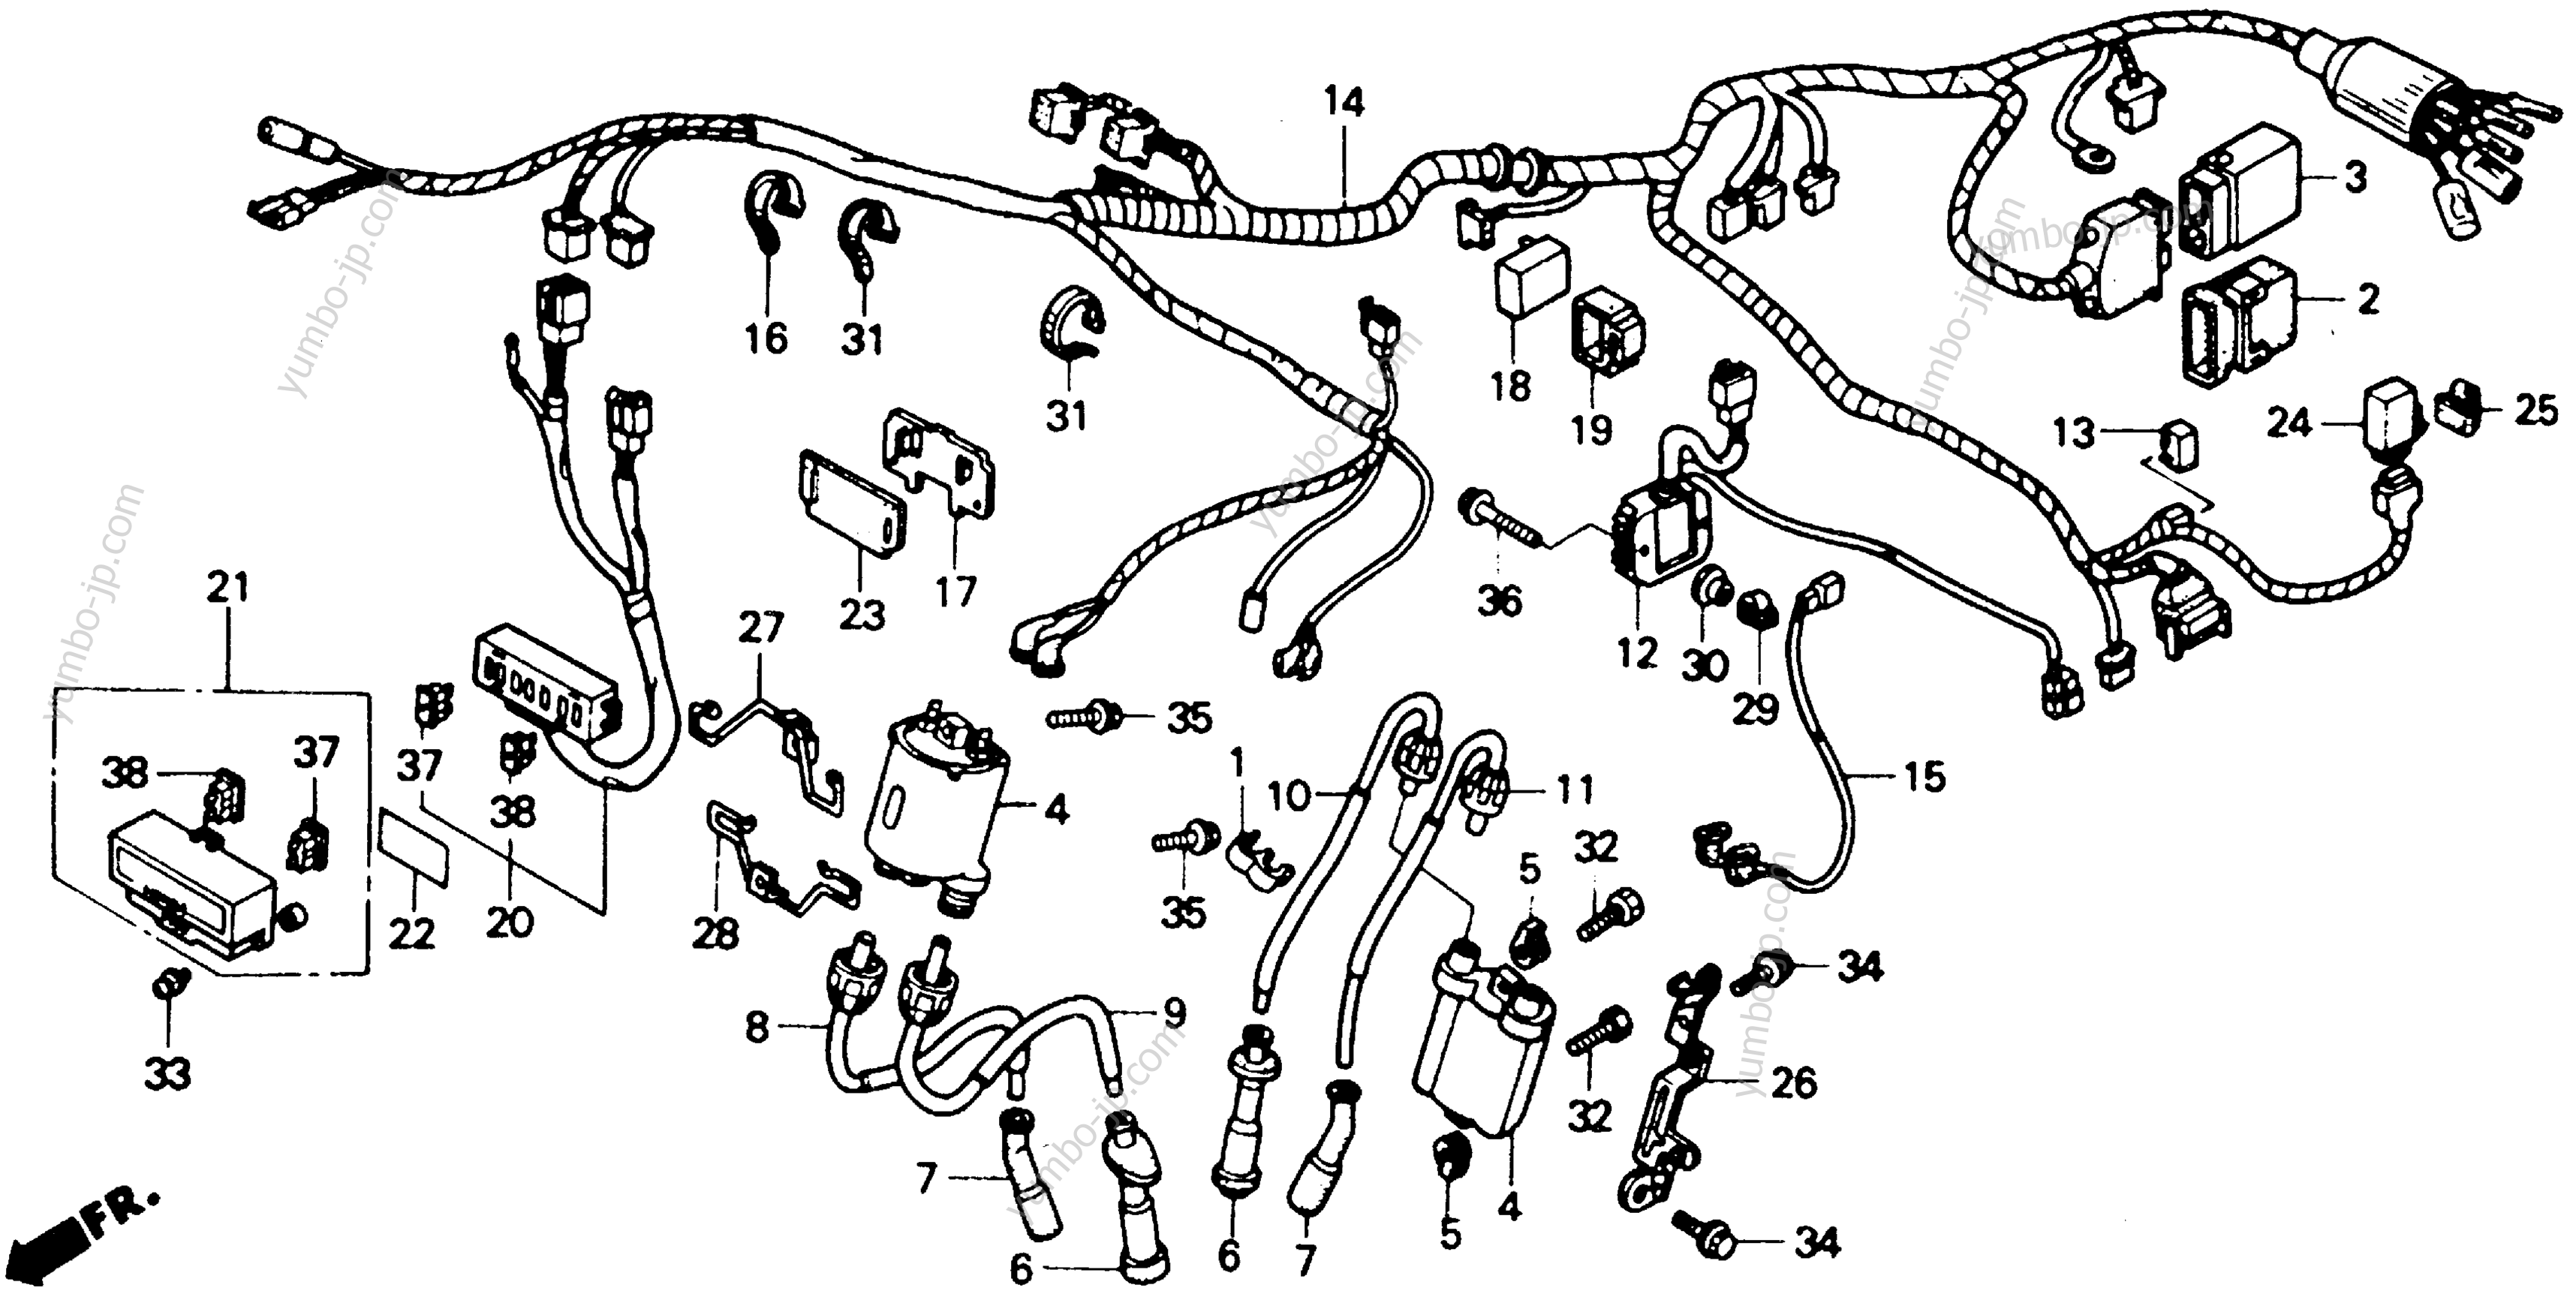 WIRE HARNESS for motorcycles HONDA NT650 A 1989 year